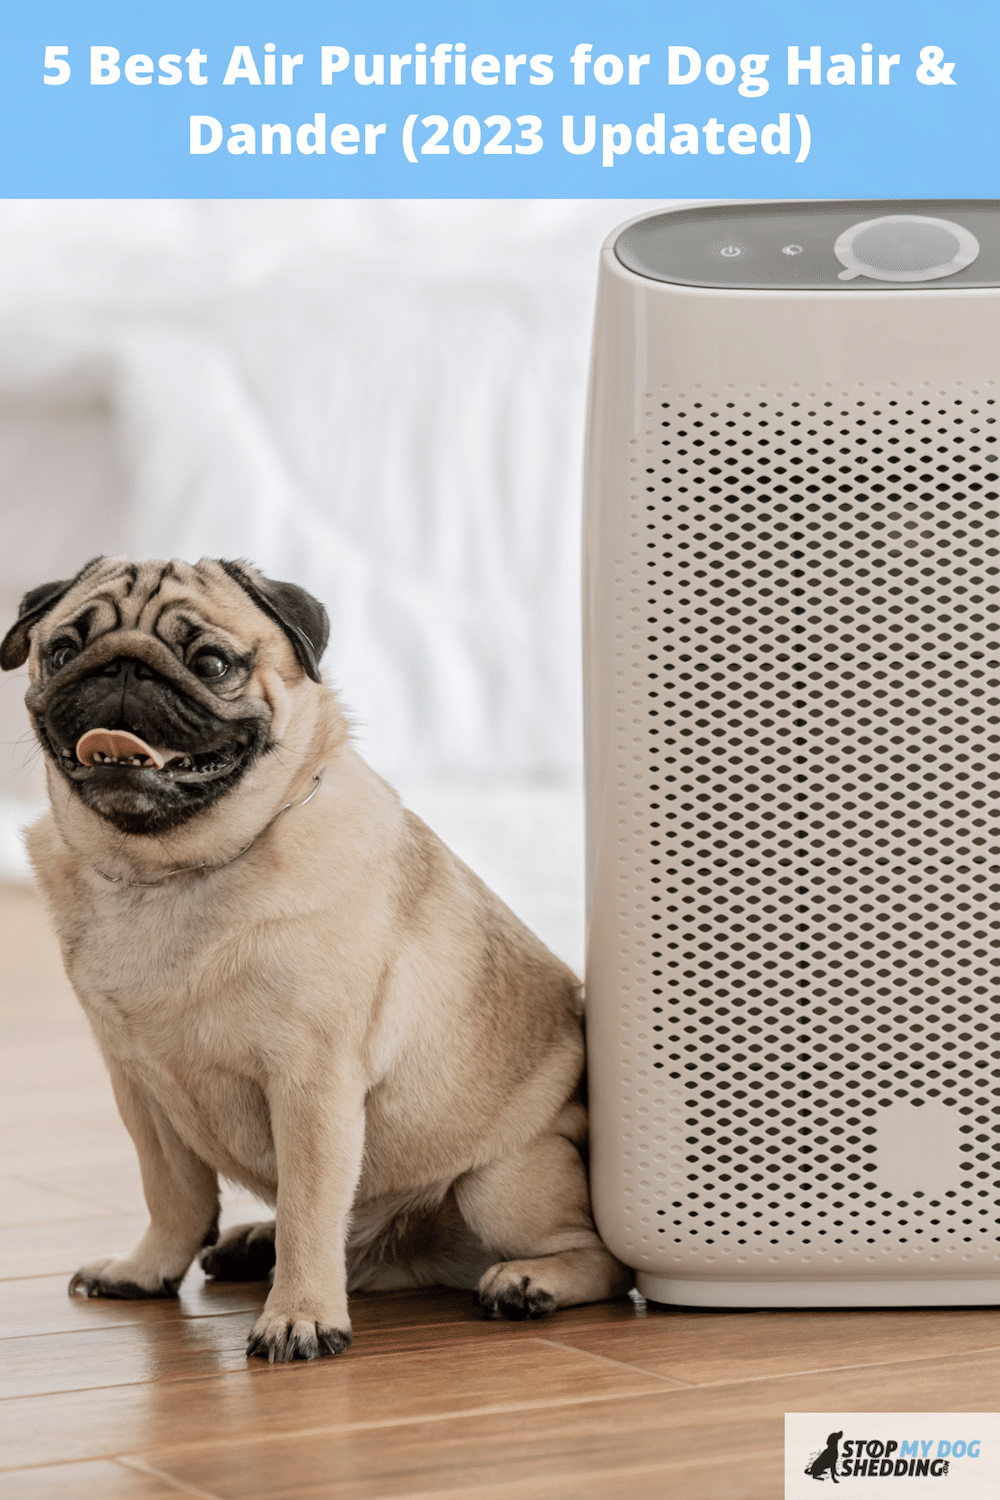 5 Best Air Purifiers for Dog Hair & Dander (2023 Updated)